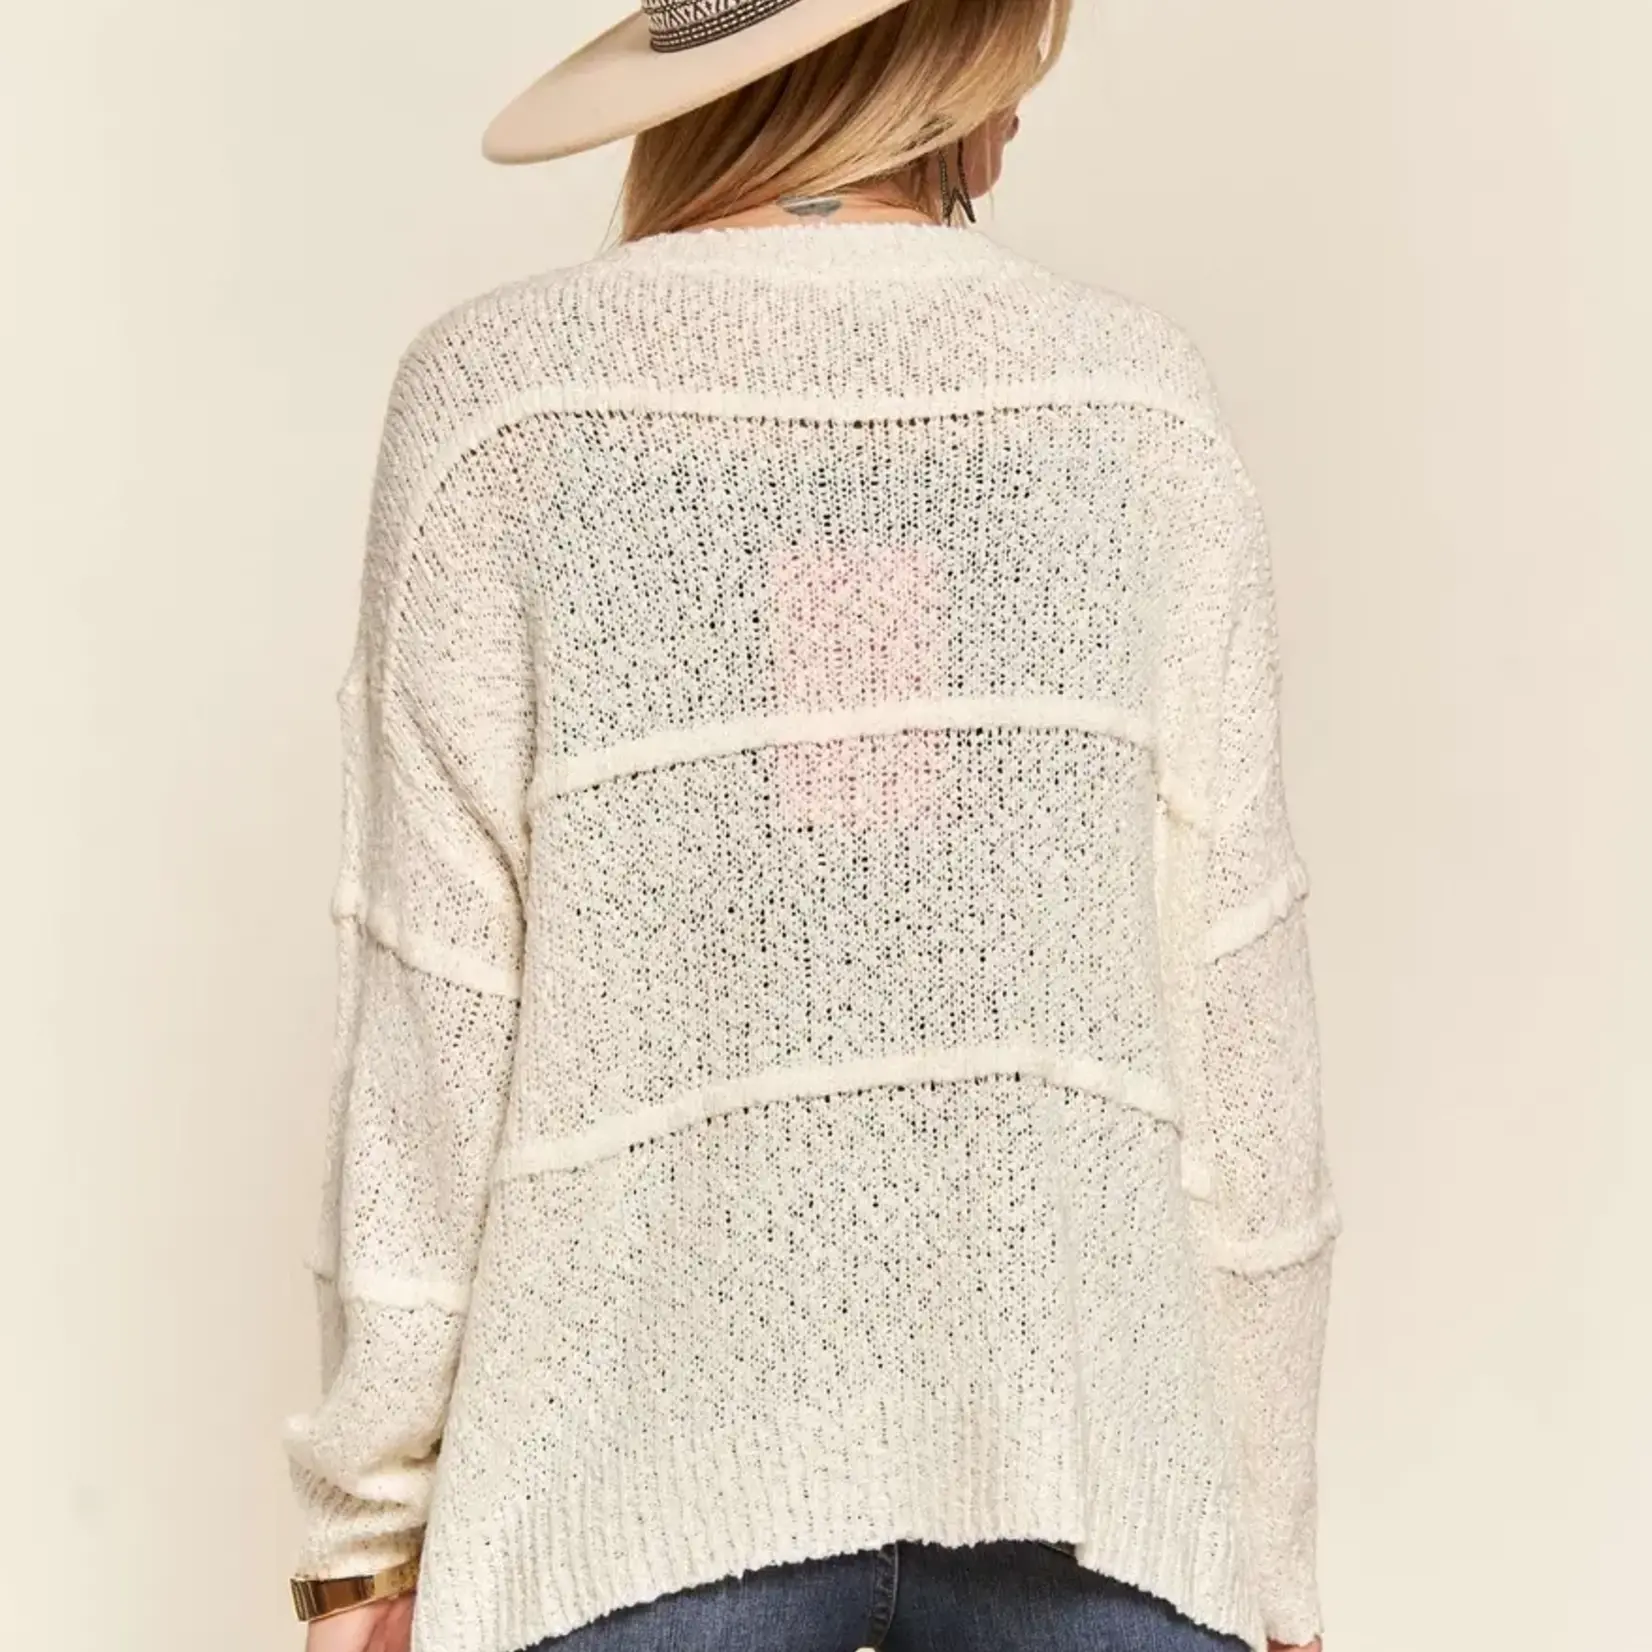 Madelyn Willa Light Sweater